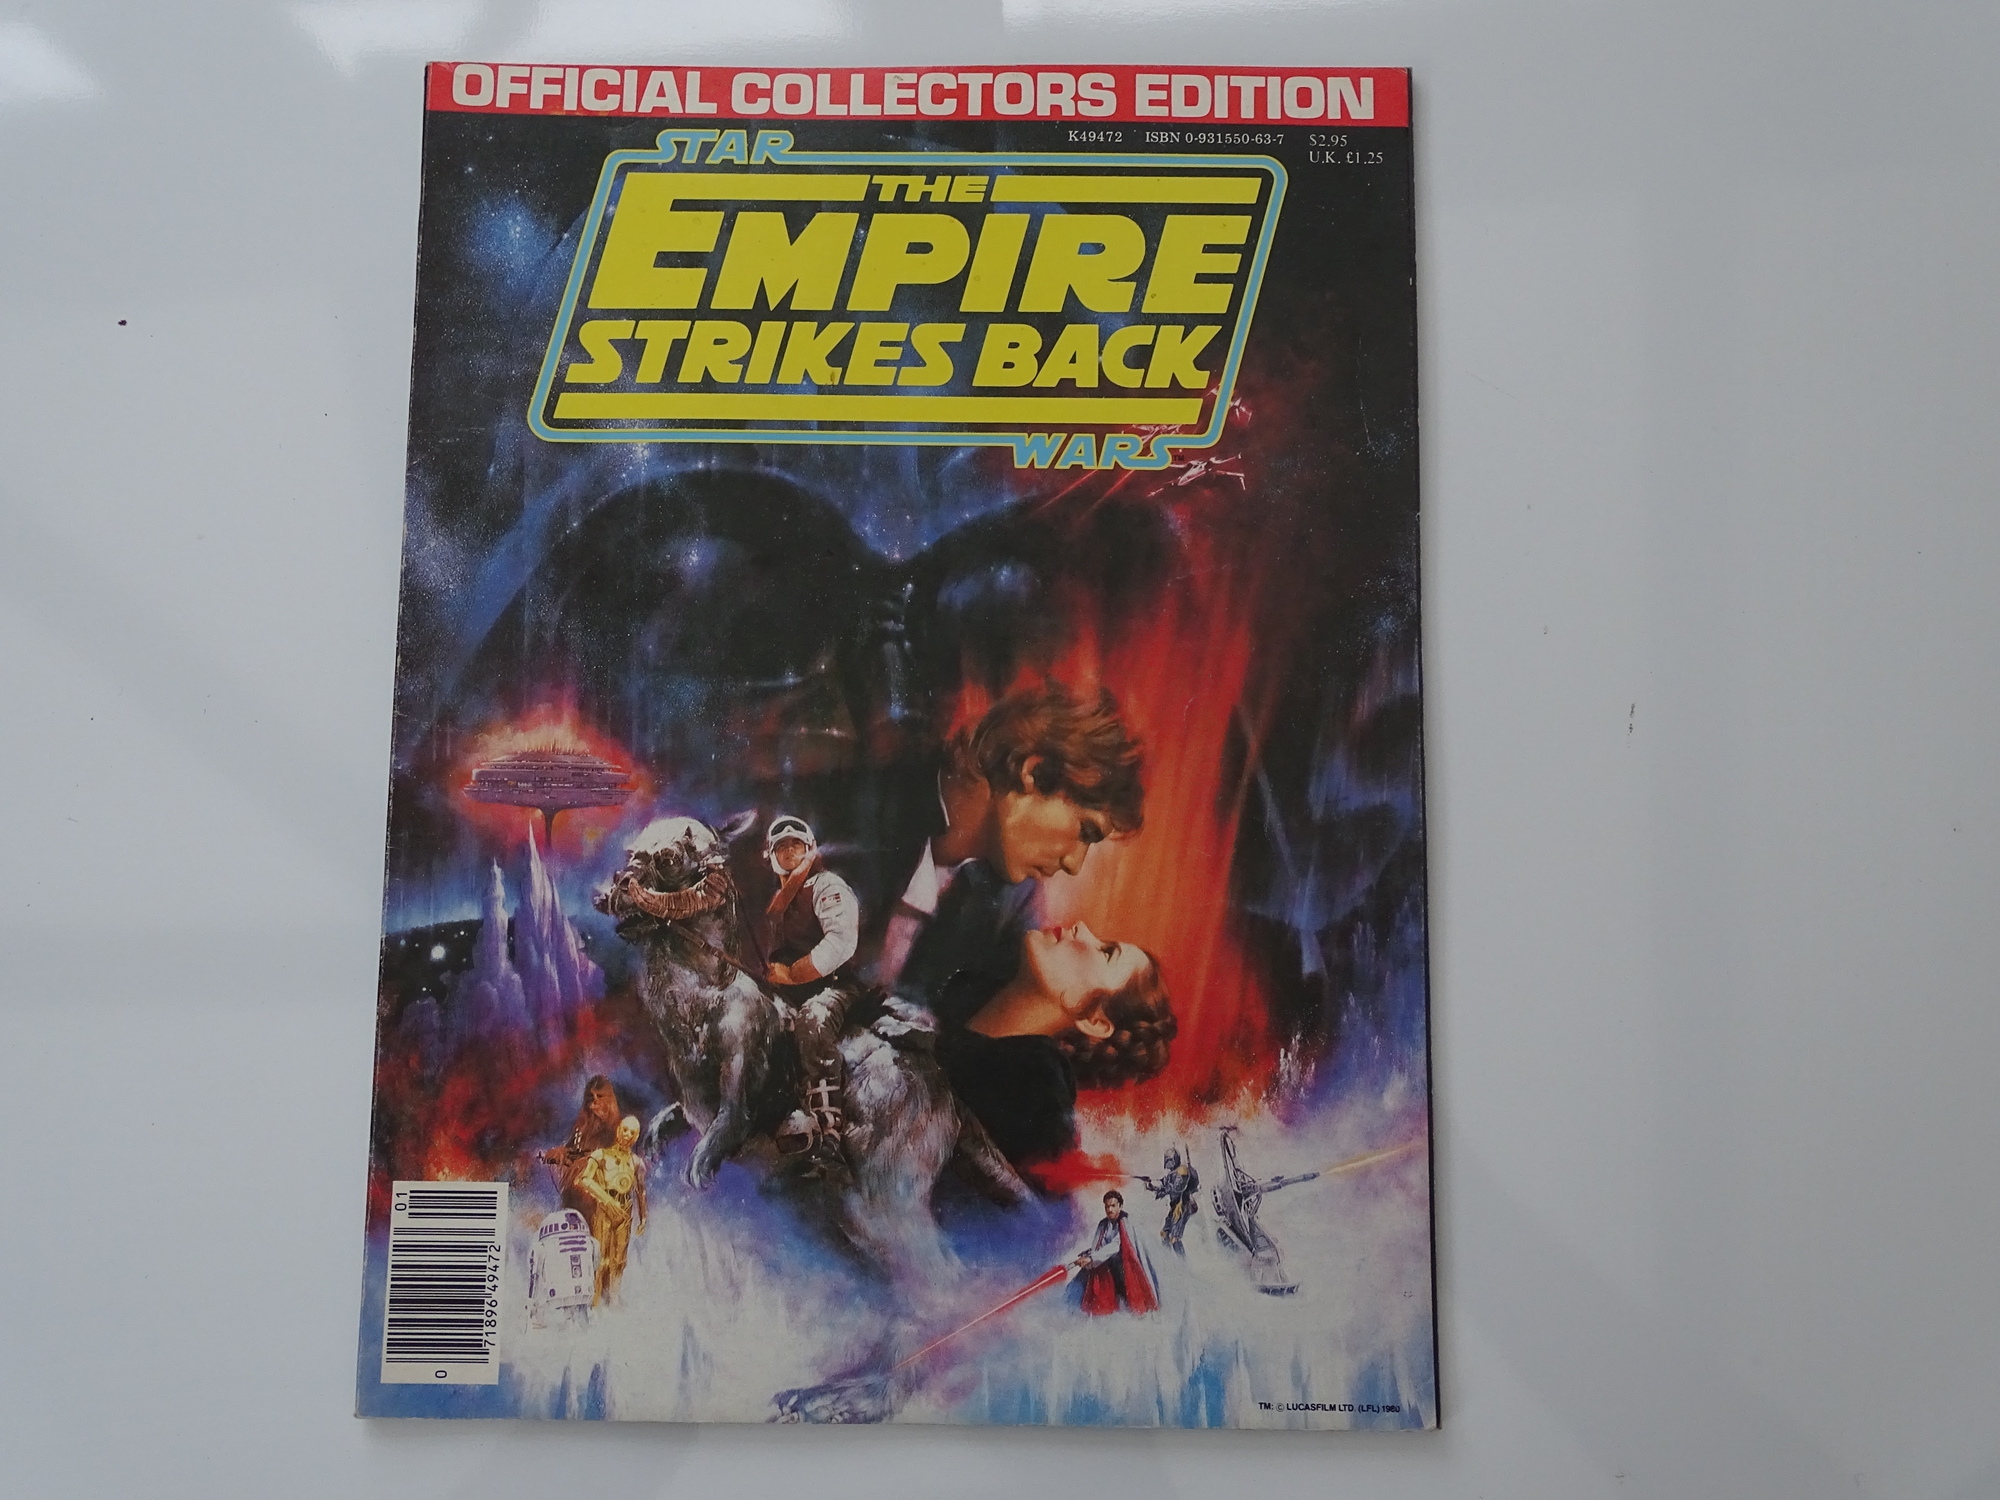 STAR WARS: THE EMPIRE STRIKES BACK (1980) - A collector's book together with 6 x US lobby Cards - Image 2 of 2